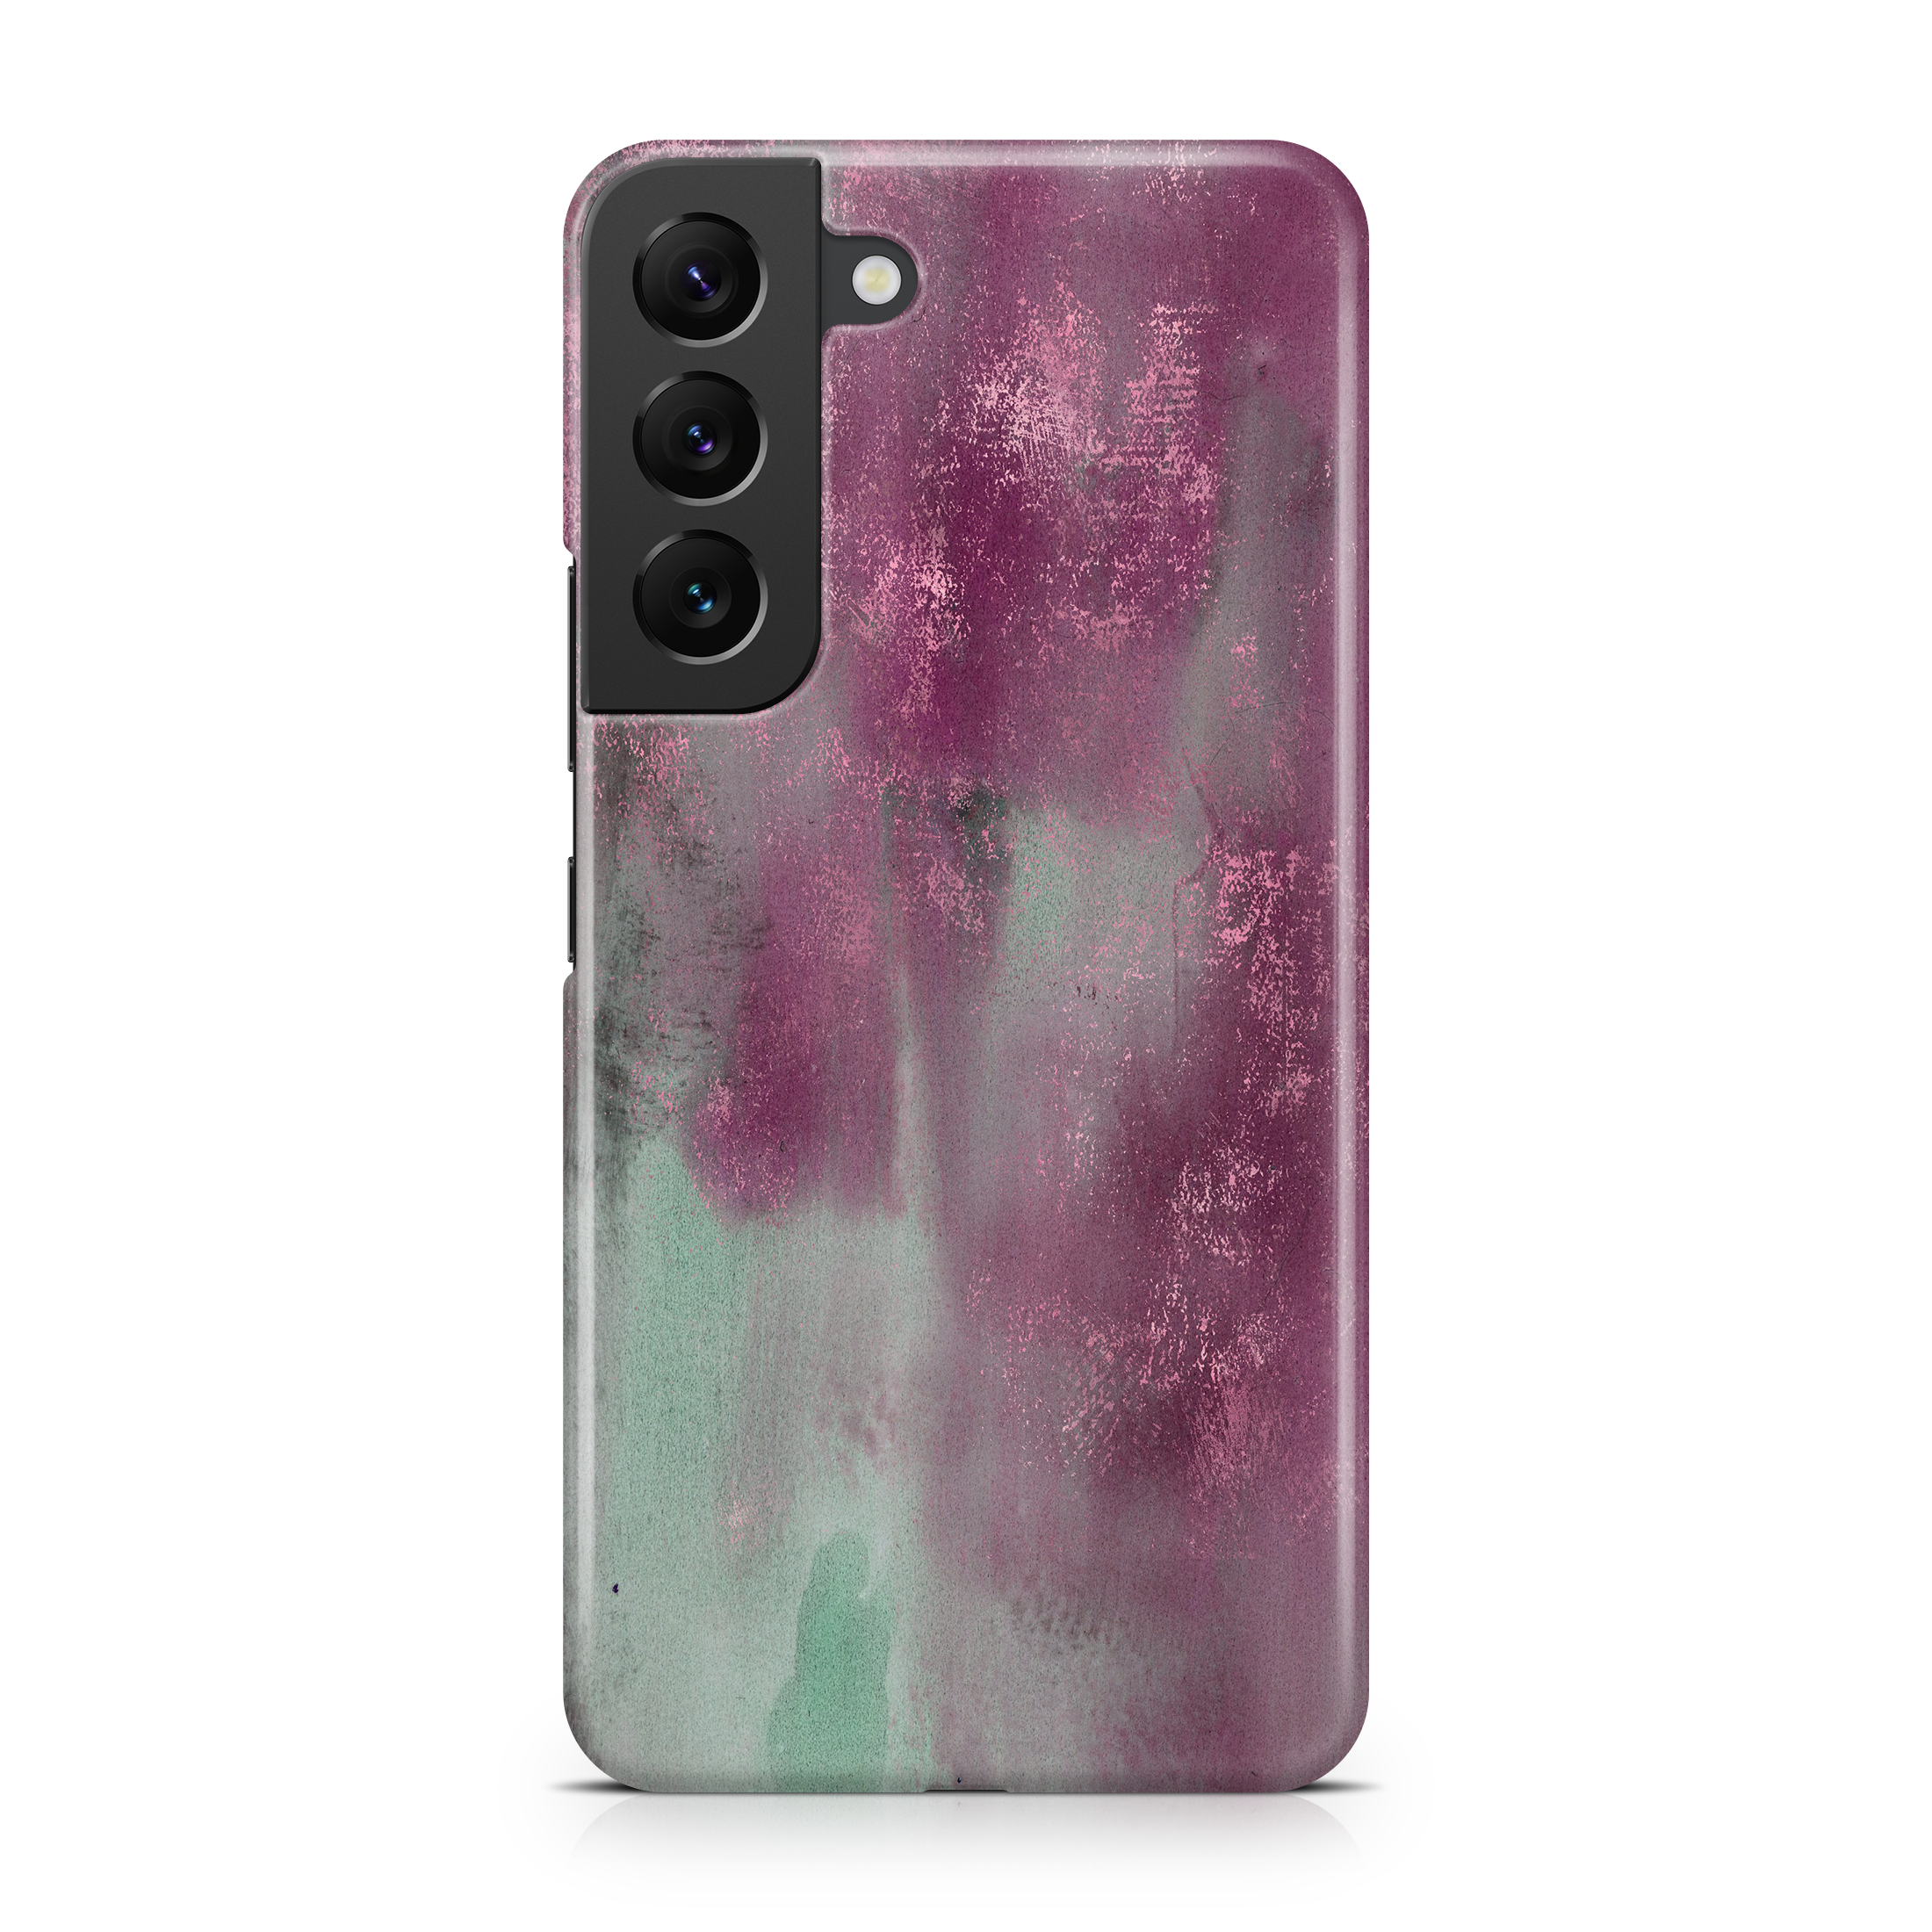 Rustic Rose I - Samsung phone case designs by CaseSwagger